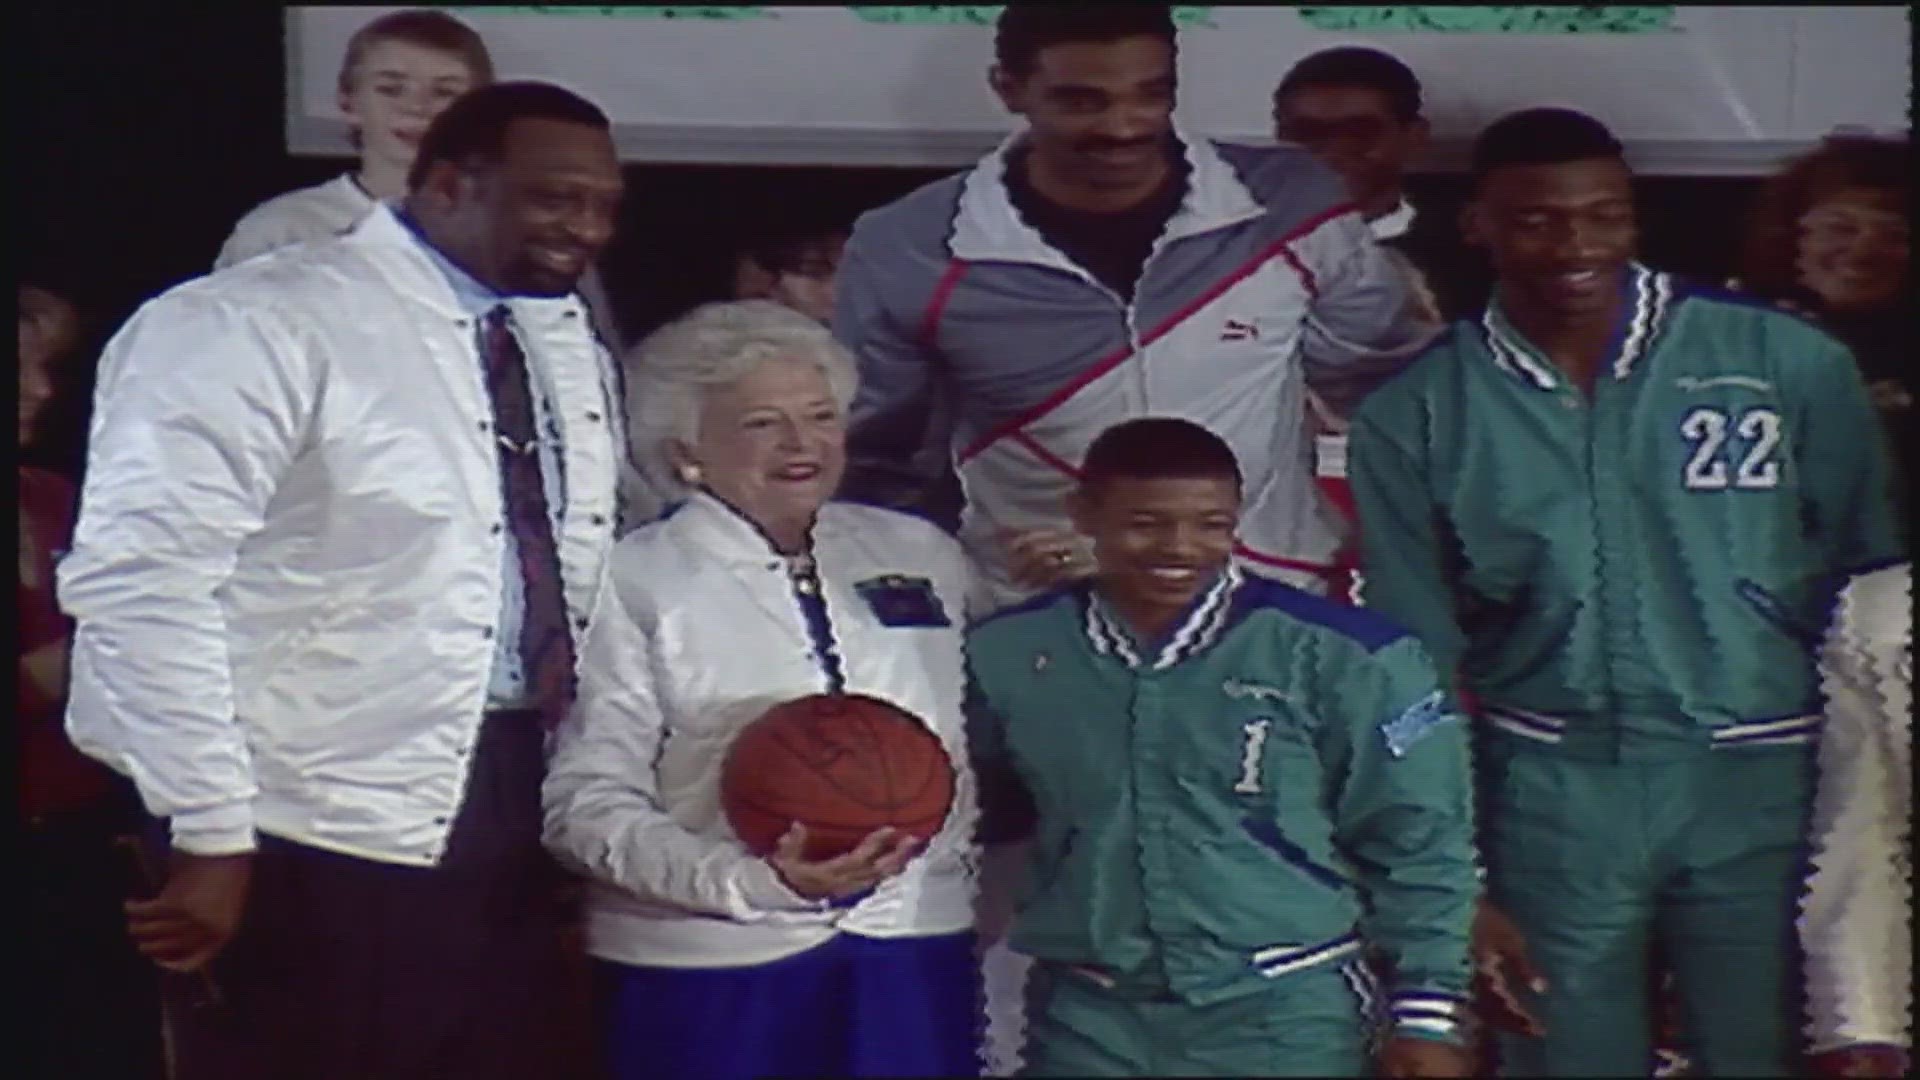 On Jan. 9, 1991, Piedmont Open Middle School had some special guests stop by.